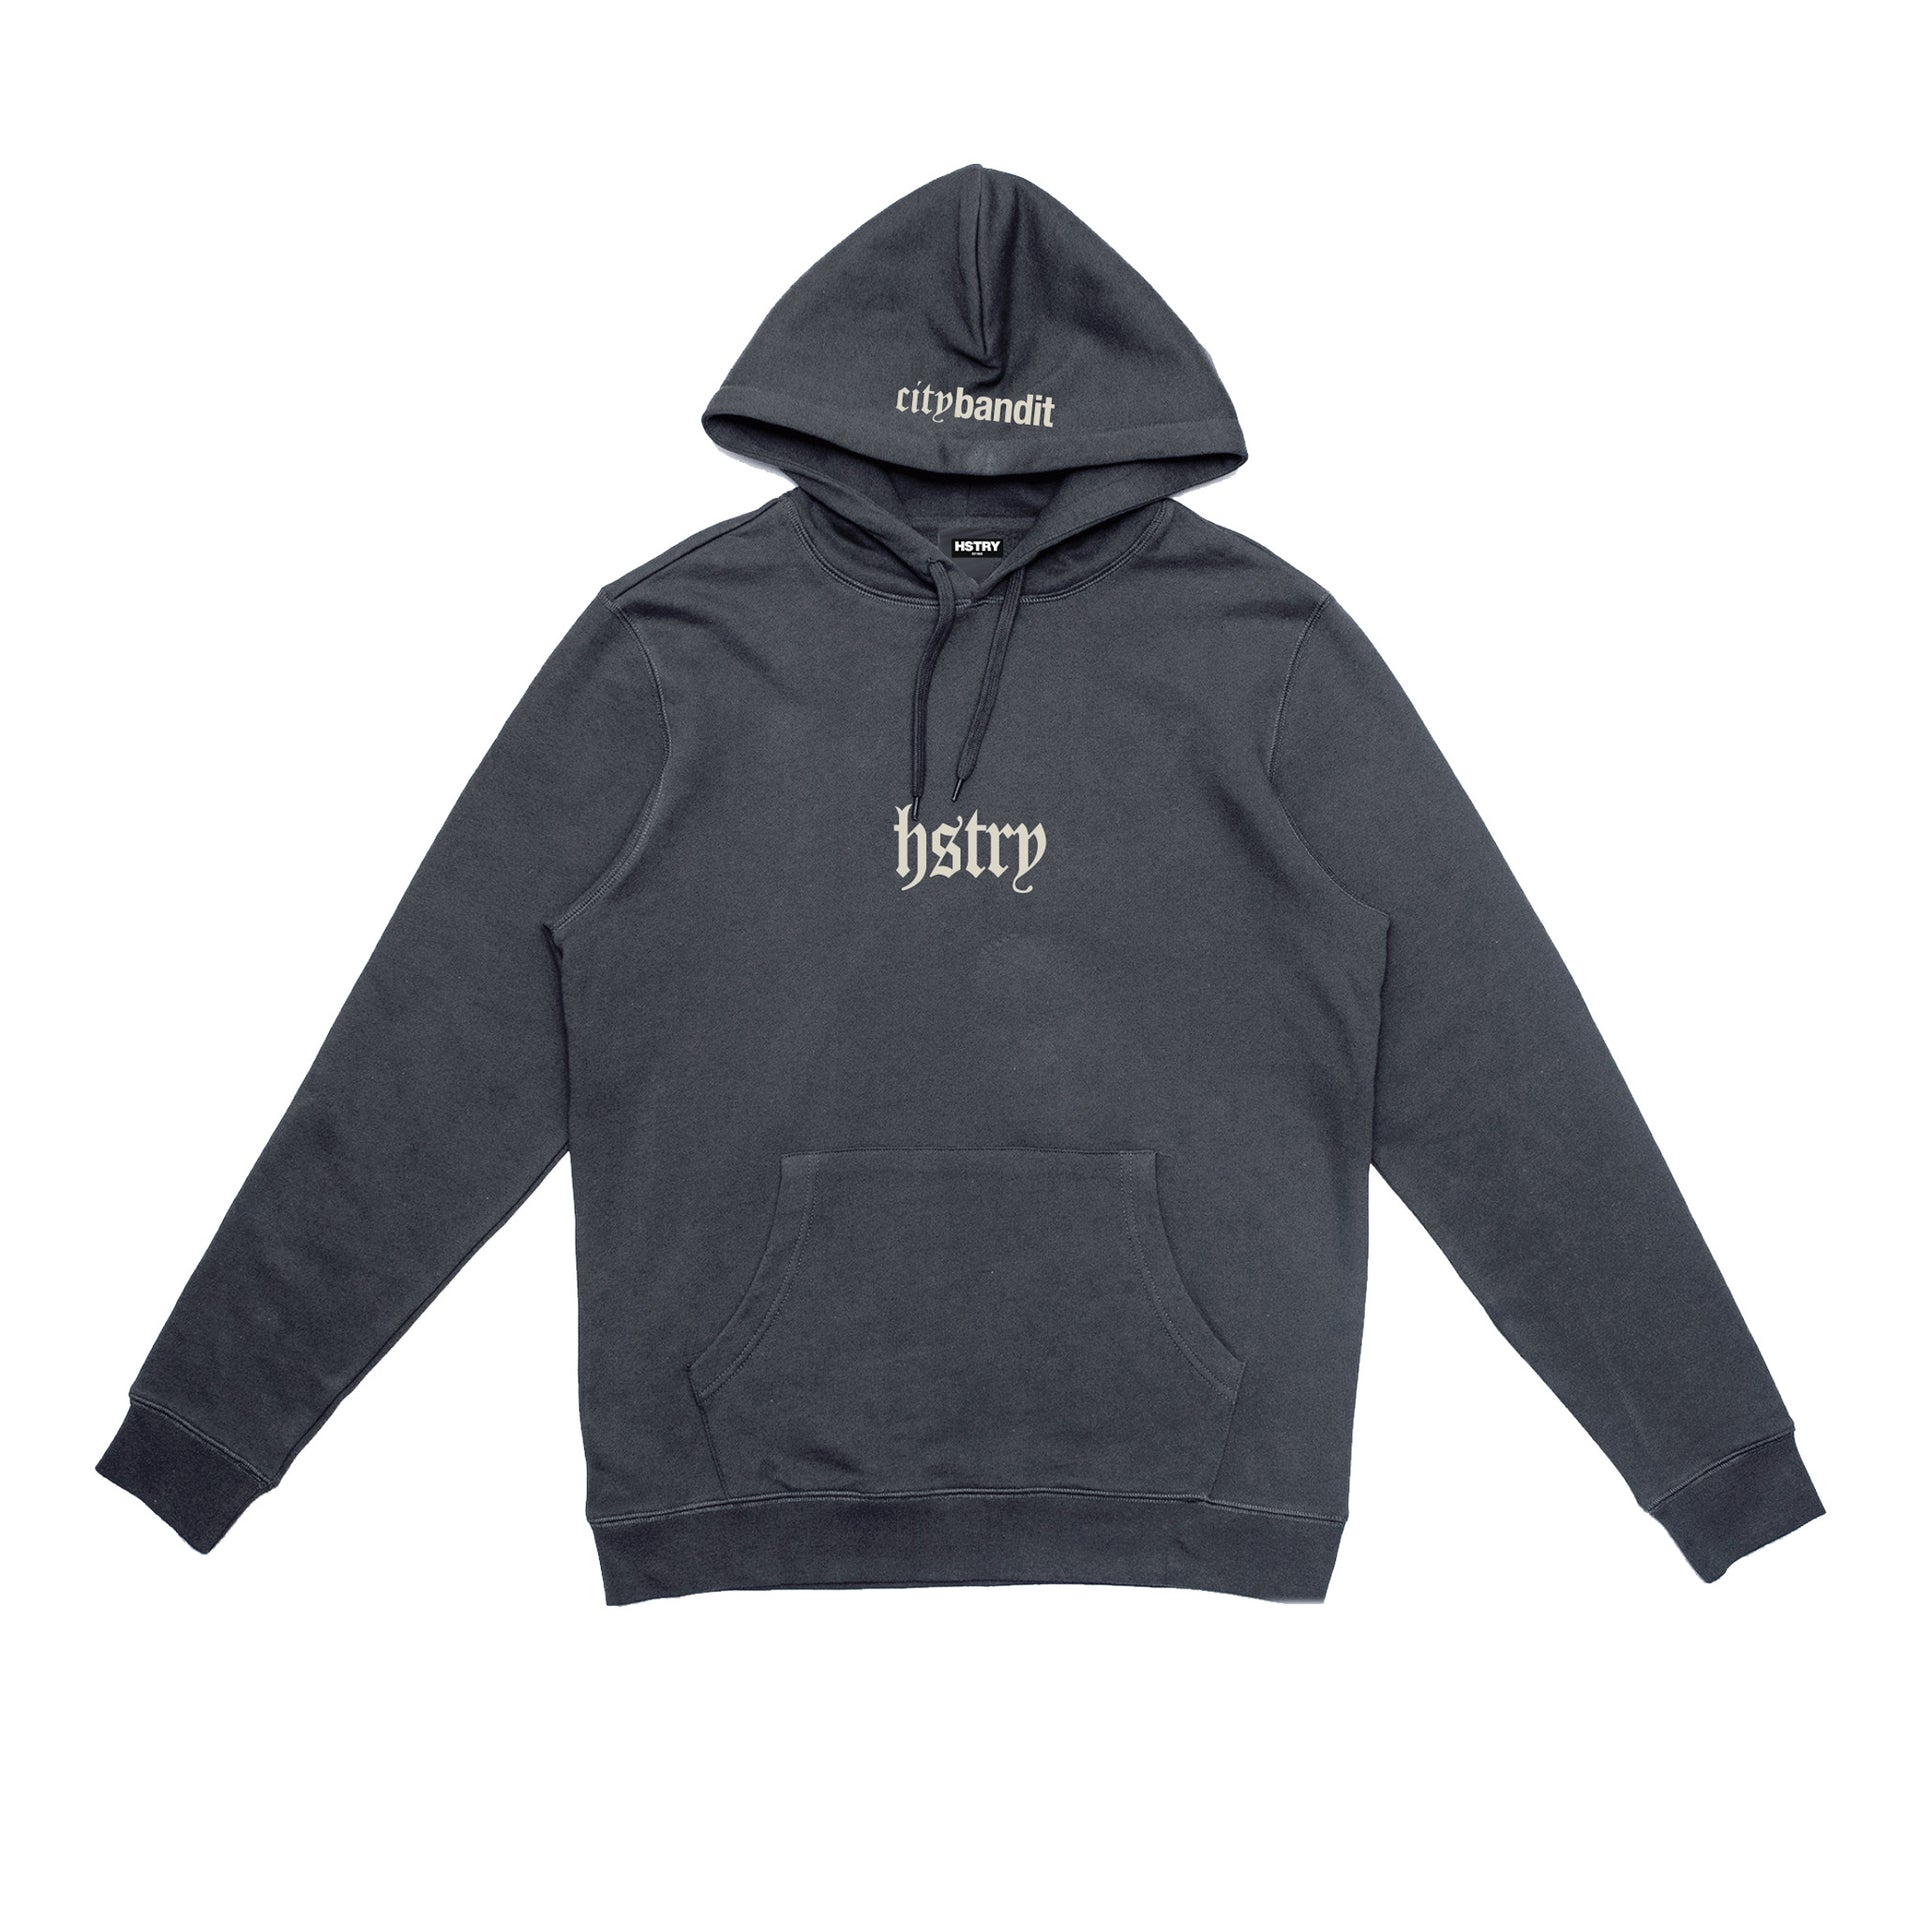 XXV CITY BANDIT EMBROIDERED HOODIE – HSTRY CLOTHING